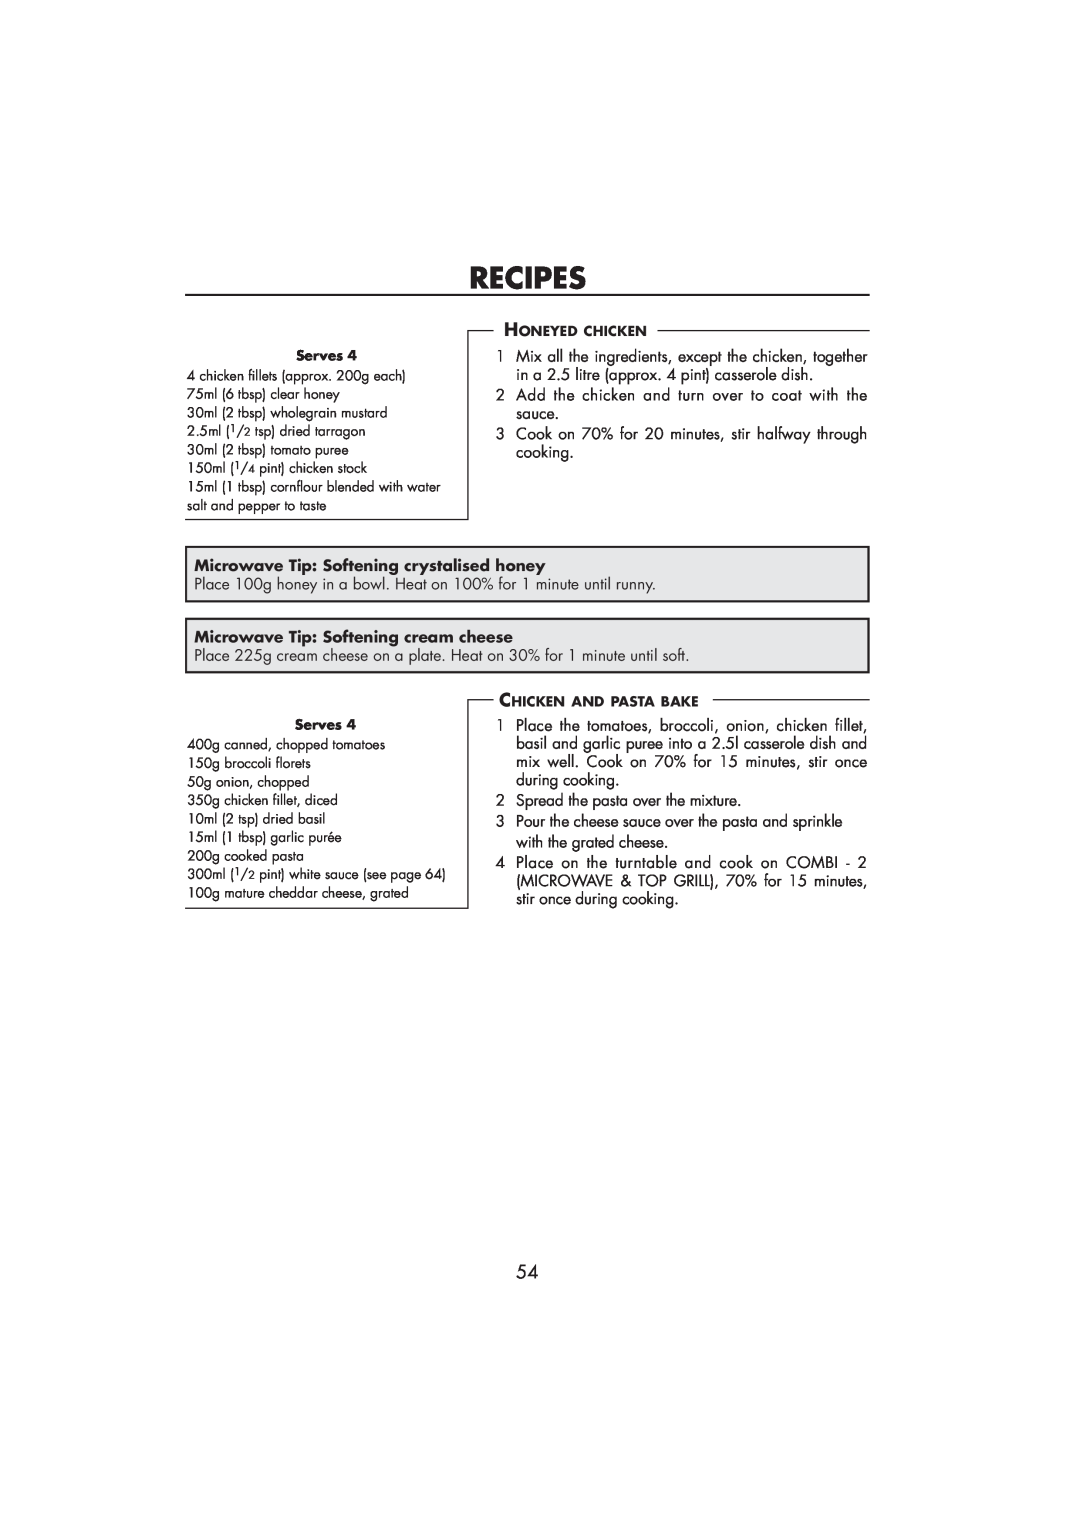 Sharp R-890SLM operation manual Recipes, Microwave Tip Softening crystalised honey, Microwave Tip Softening cream cheese 